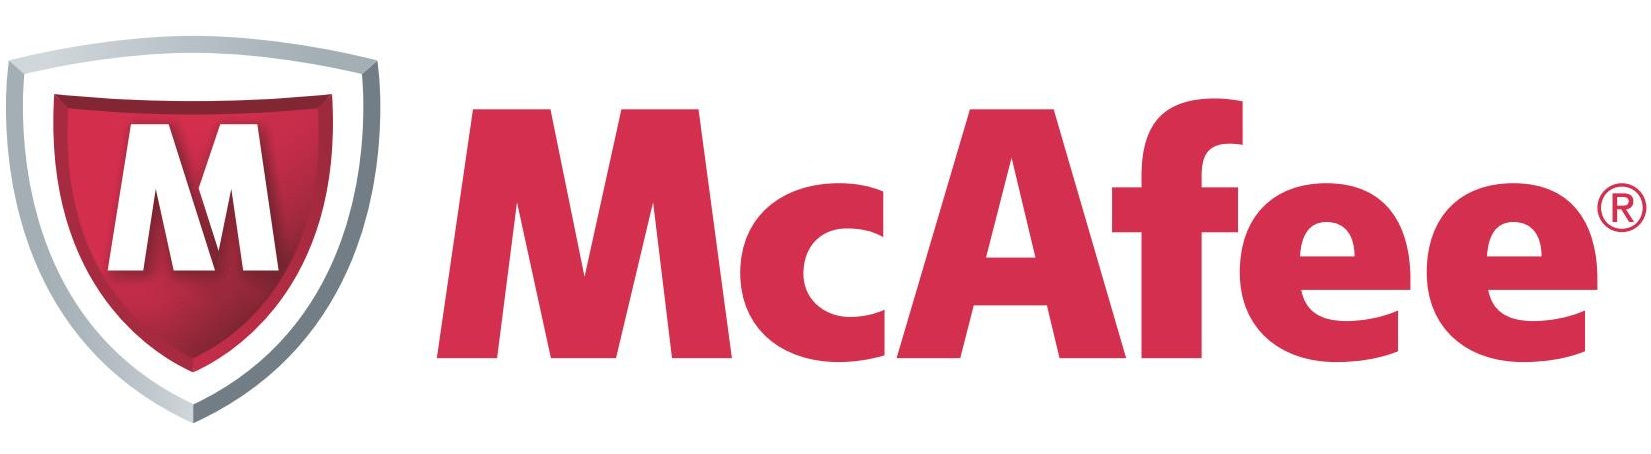 McAfee by Intel DLP 4400 Network Security/Firewall Appliance